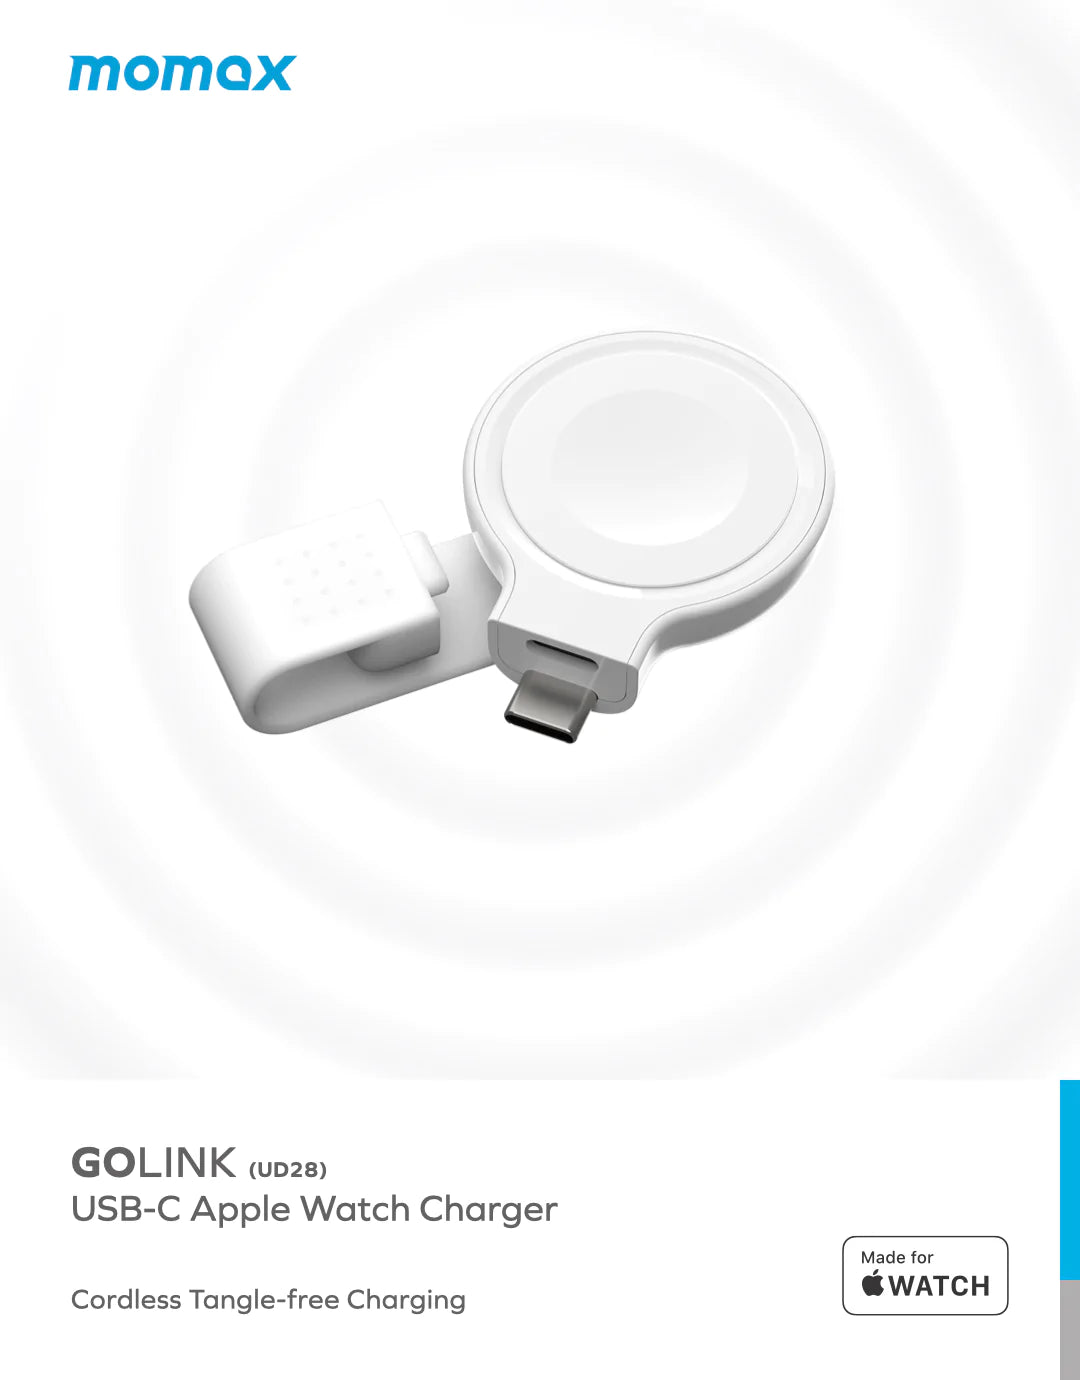 MOMAX GOLINK USB-C Apple Watch Charger